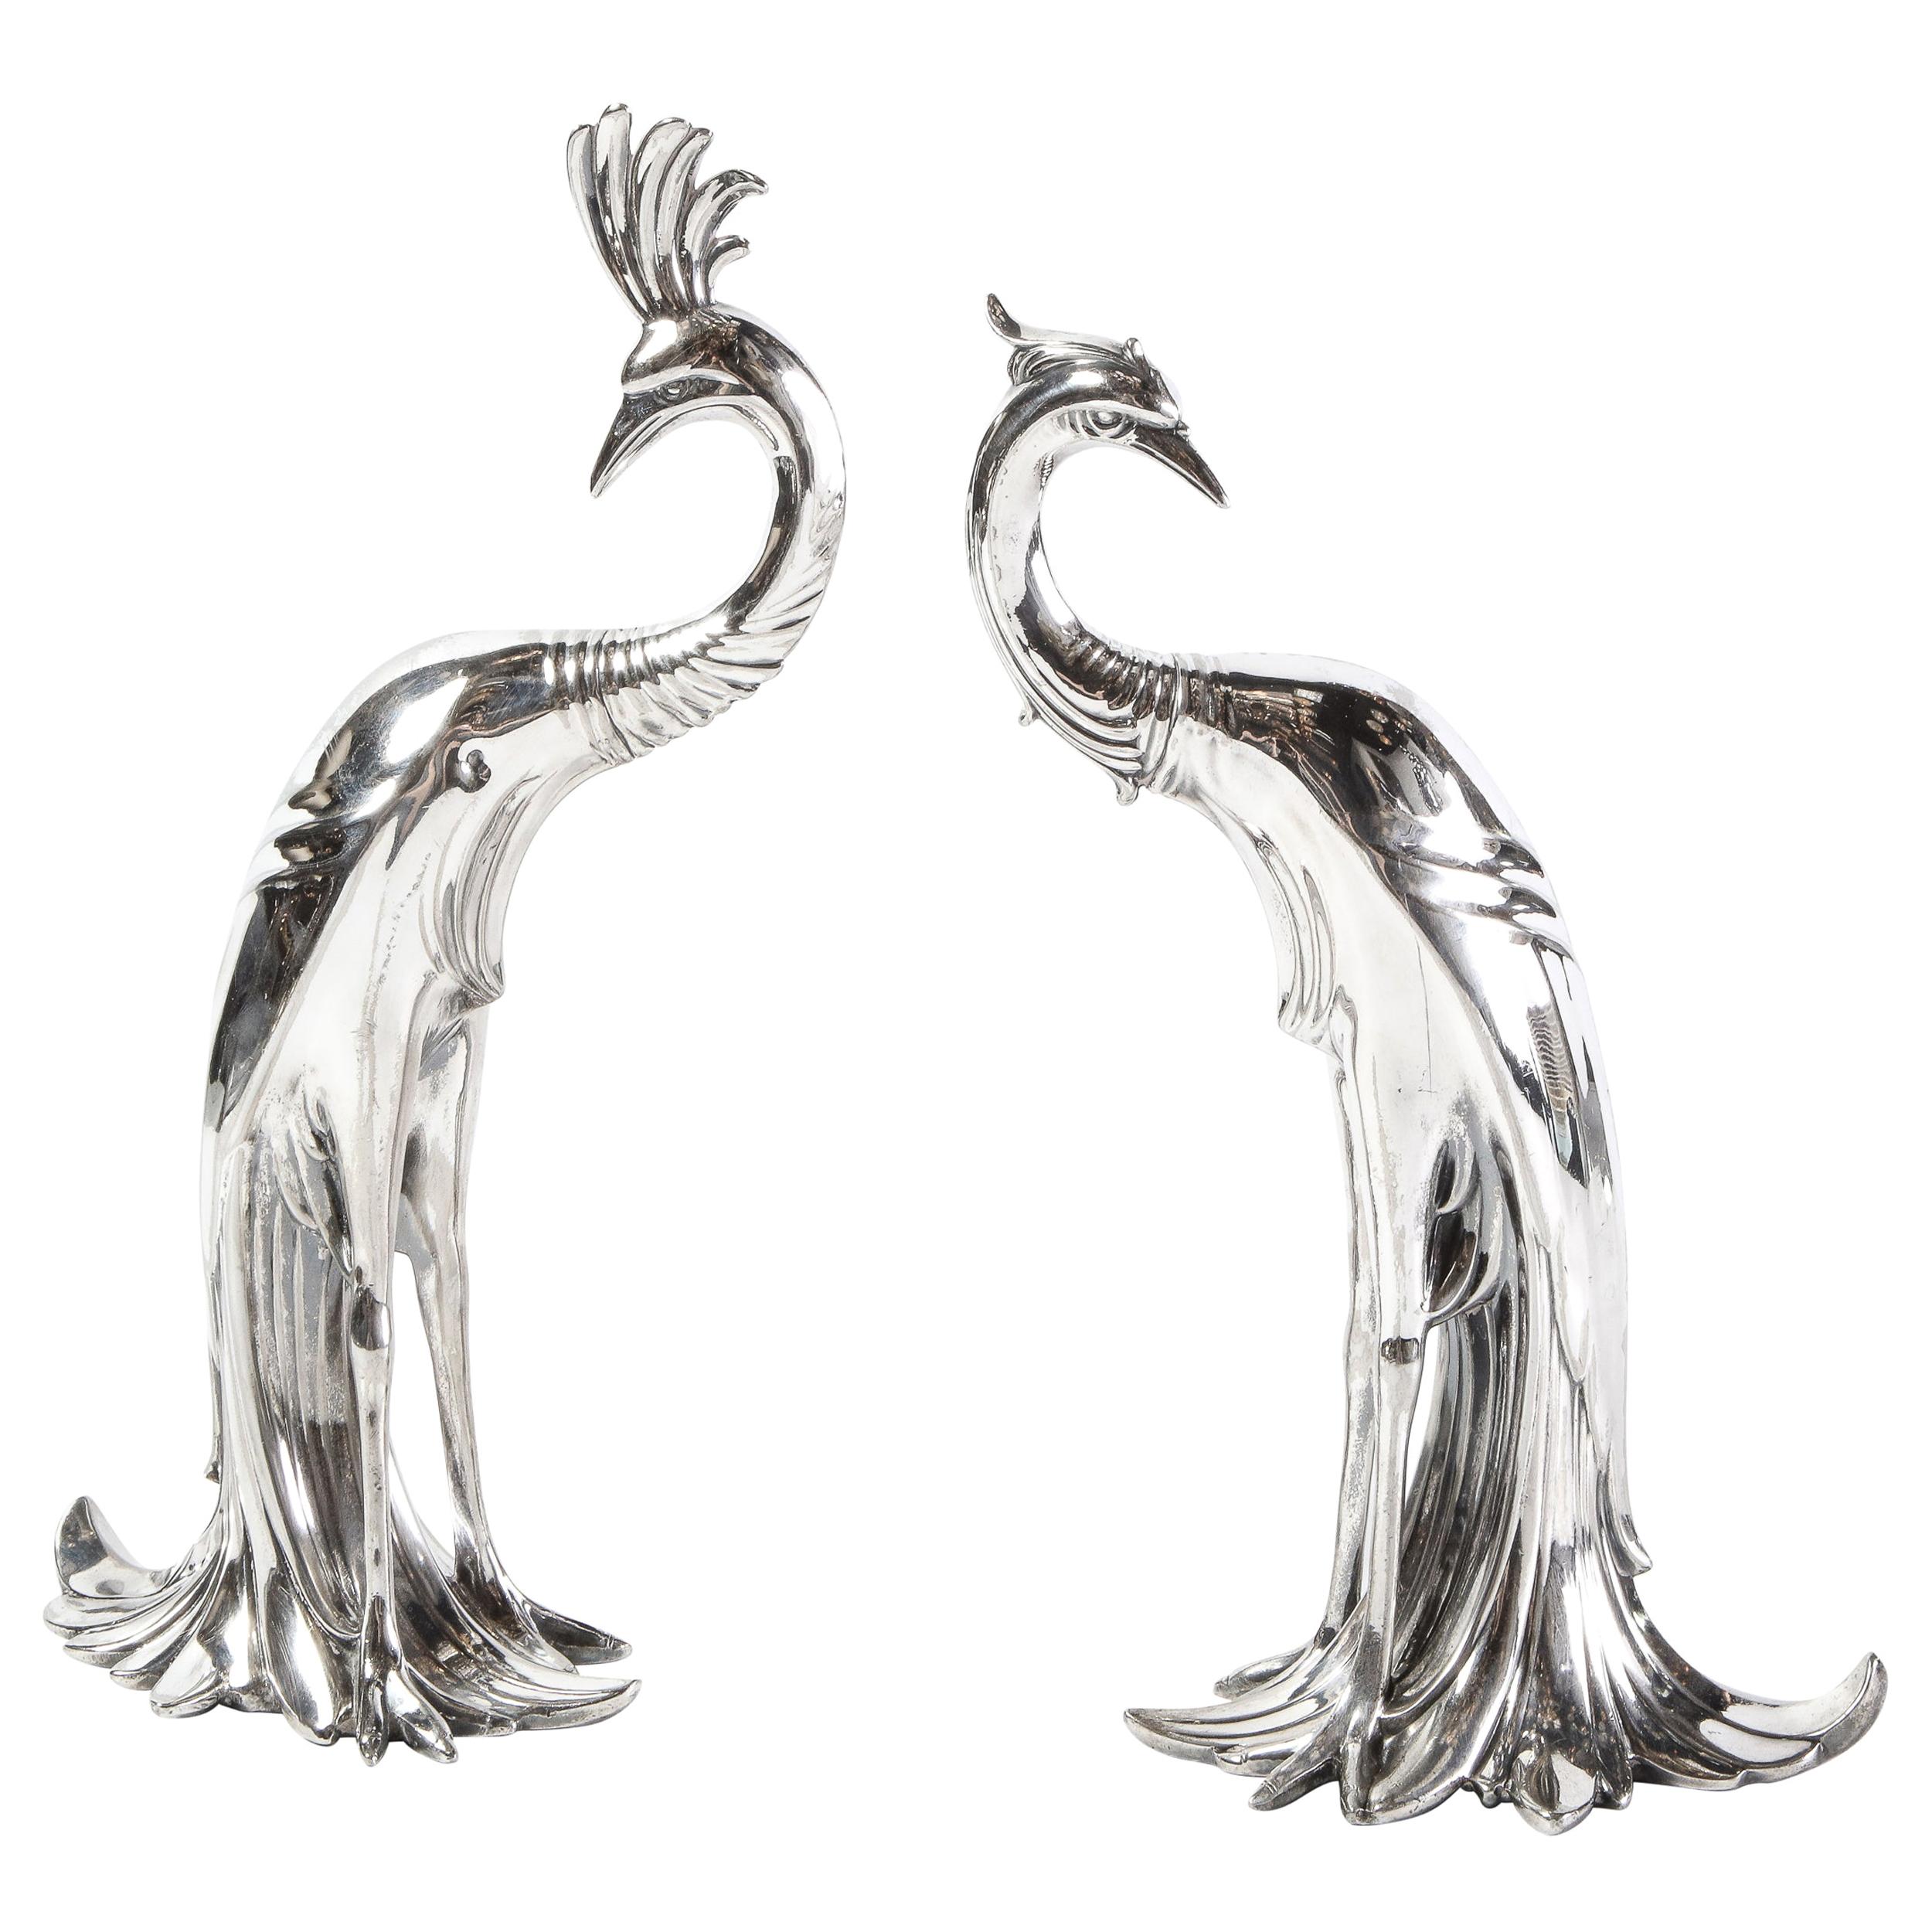 Pair of 1930s Art Deco Silverplated Stylized Peacock Sculptures by Weidlich Bros